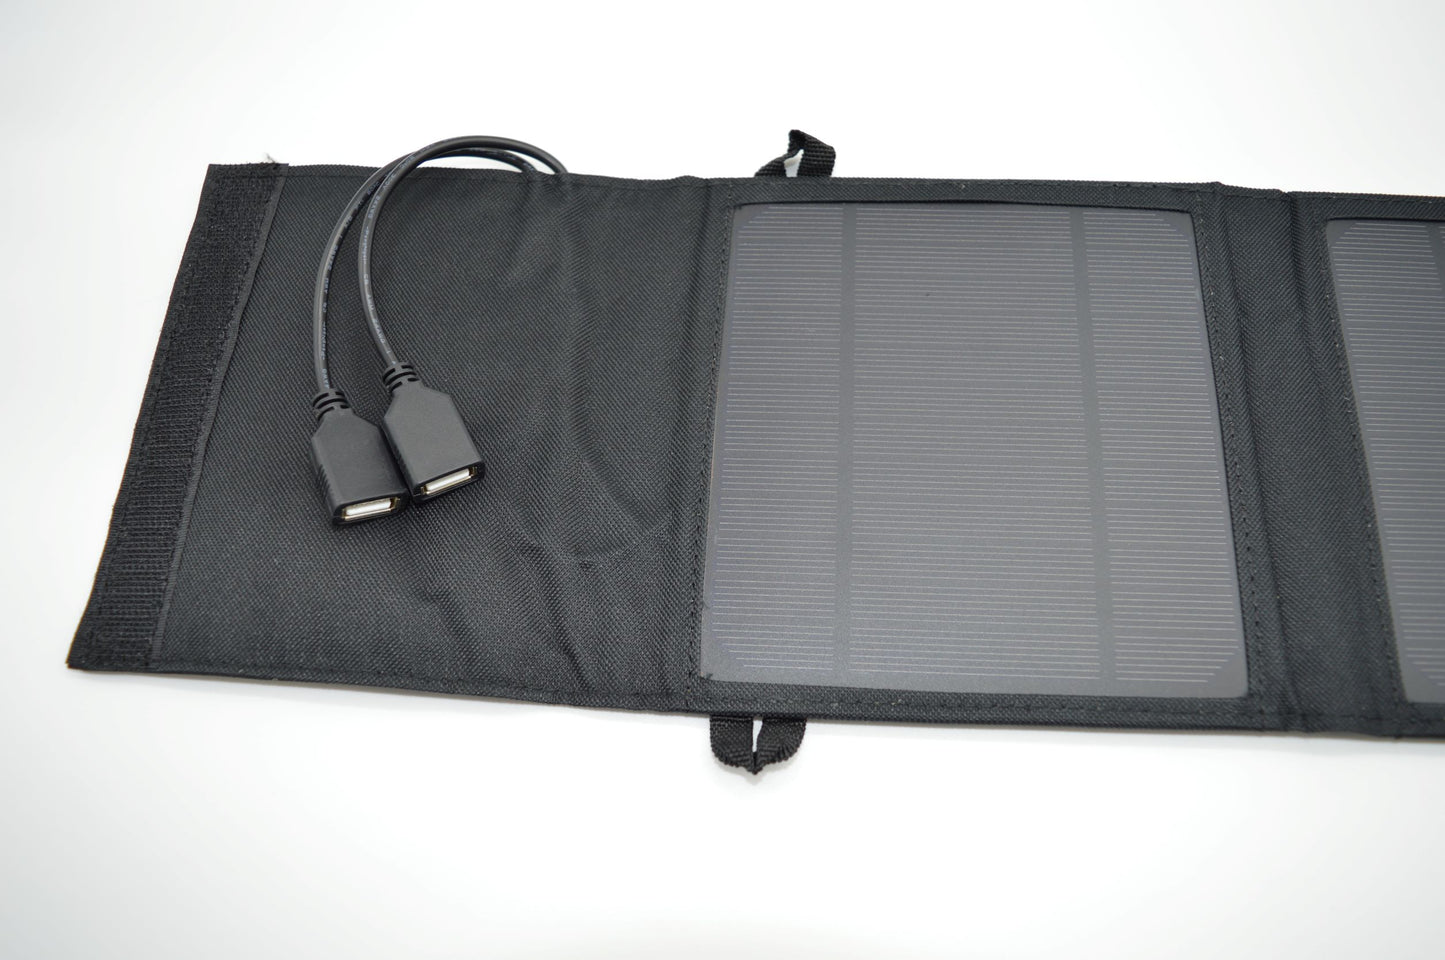 18W Solar Panel Charger